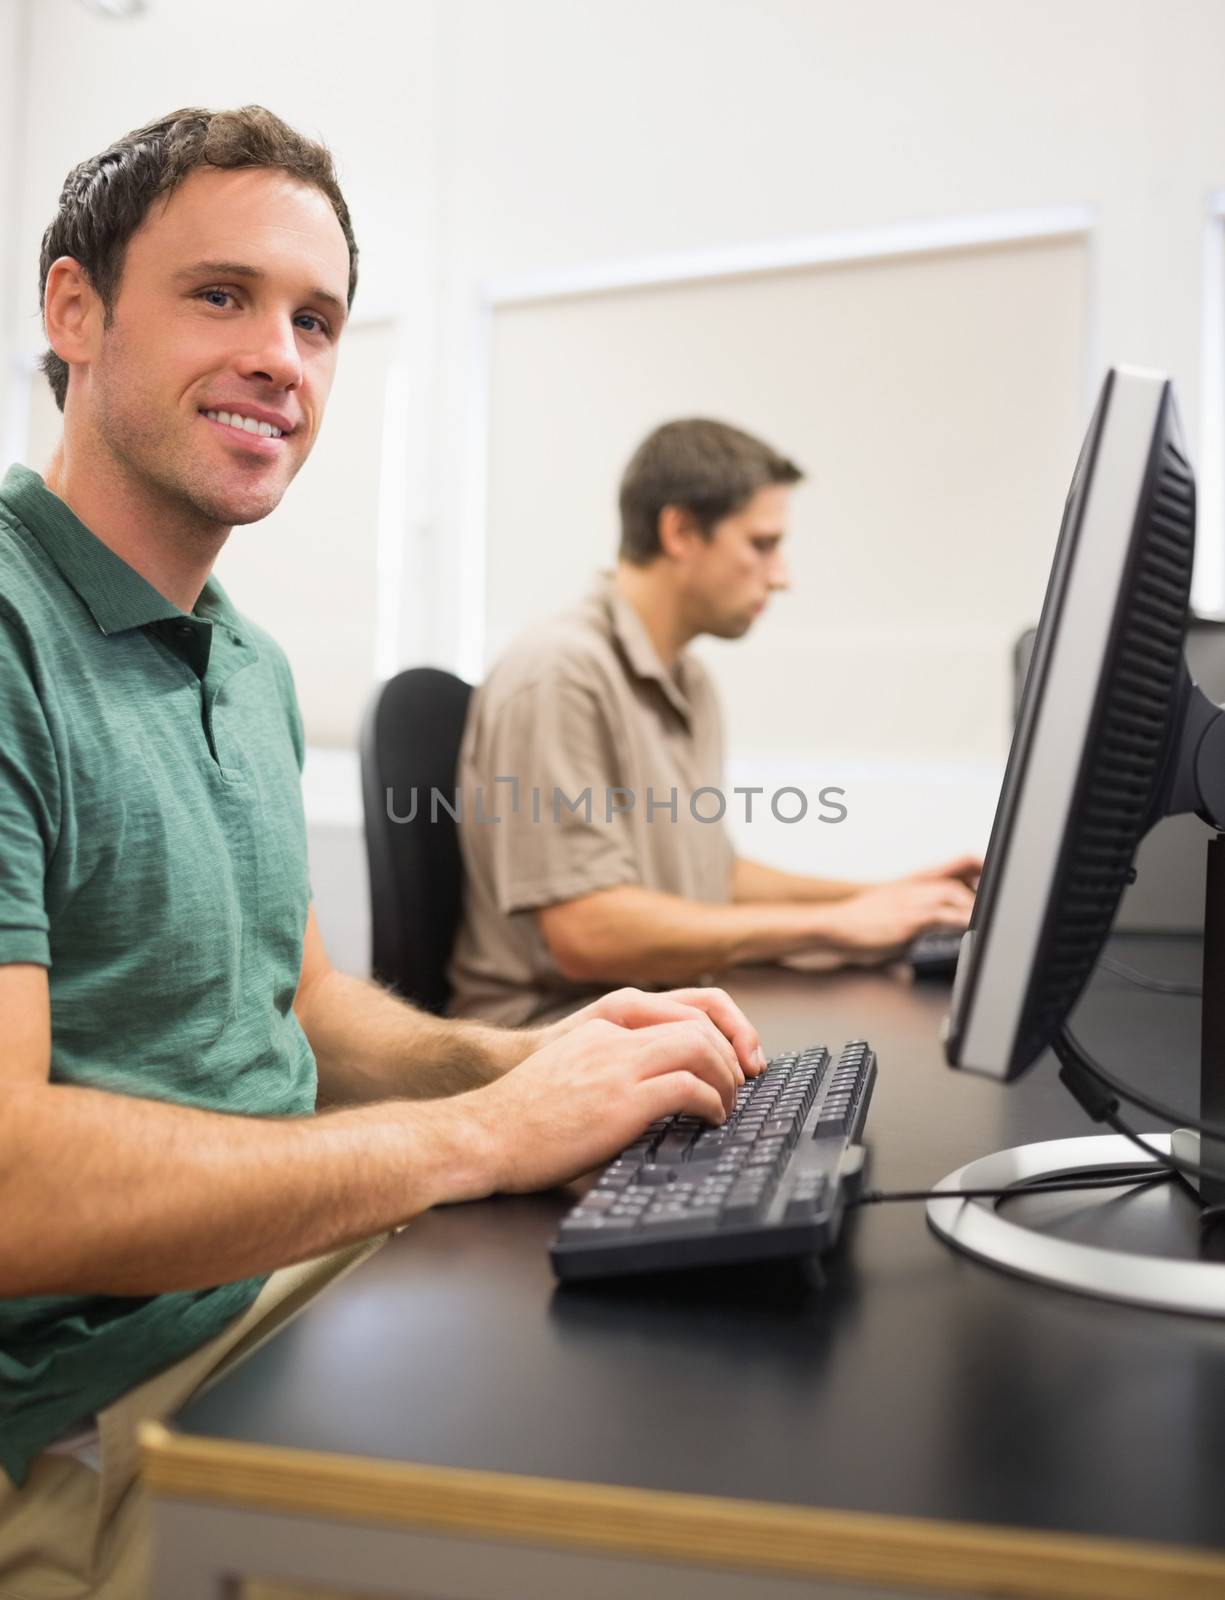 Portrait of a smiling man by other mature student using computers in the computer room